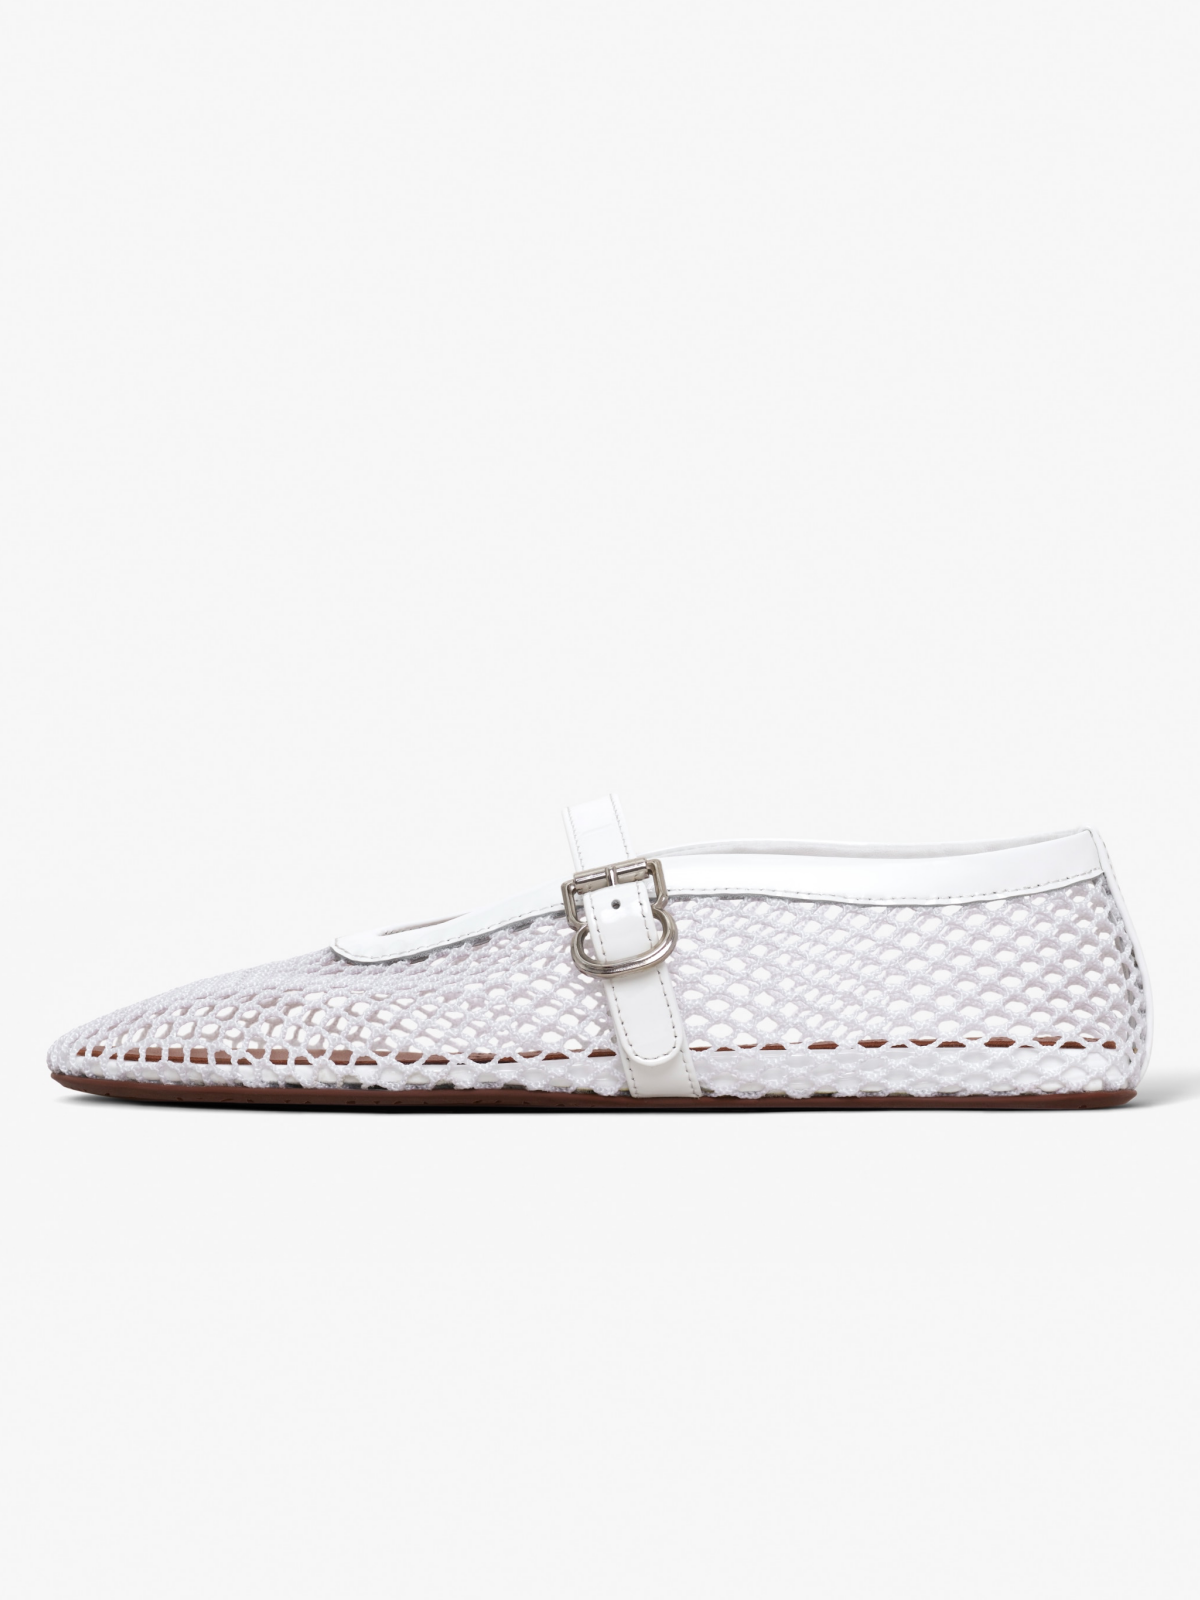 White Fishnet Ballet Flats Mary Janes With Buckle Strap